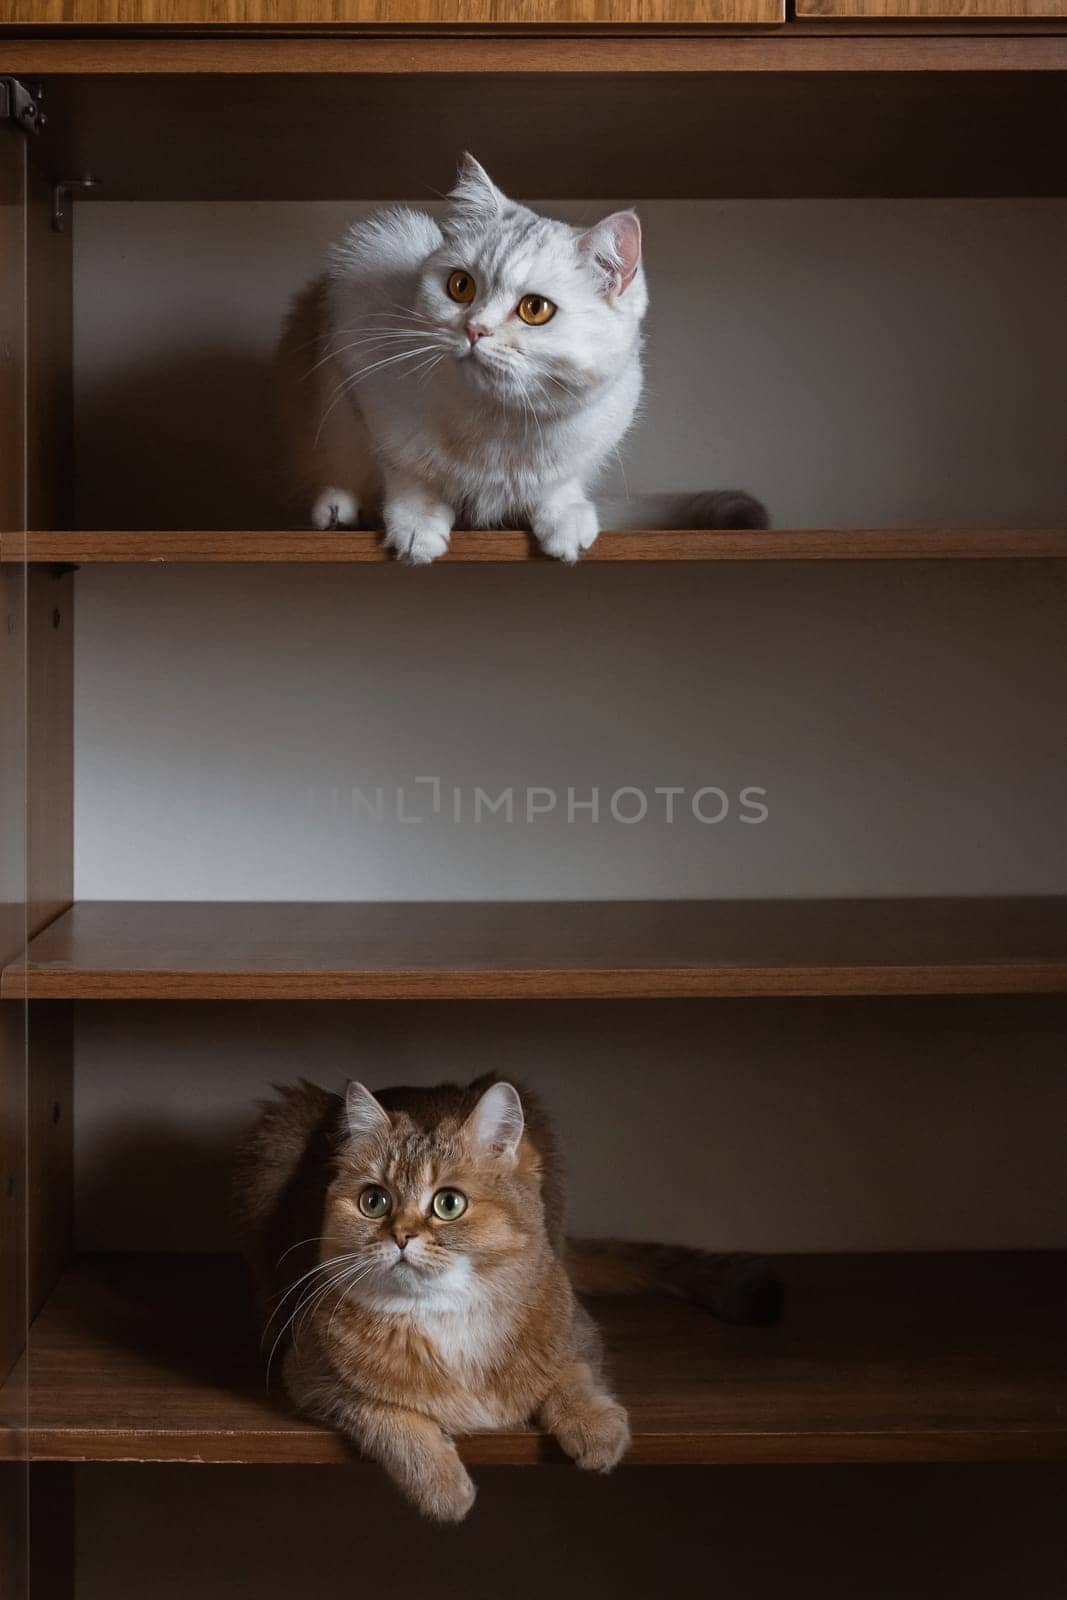 Two British bred domestic cats look at each other from different shelves of the closet